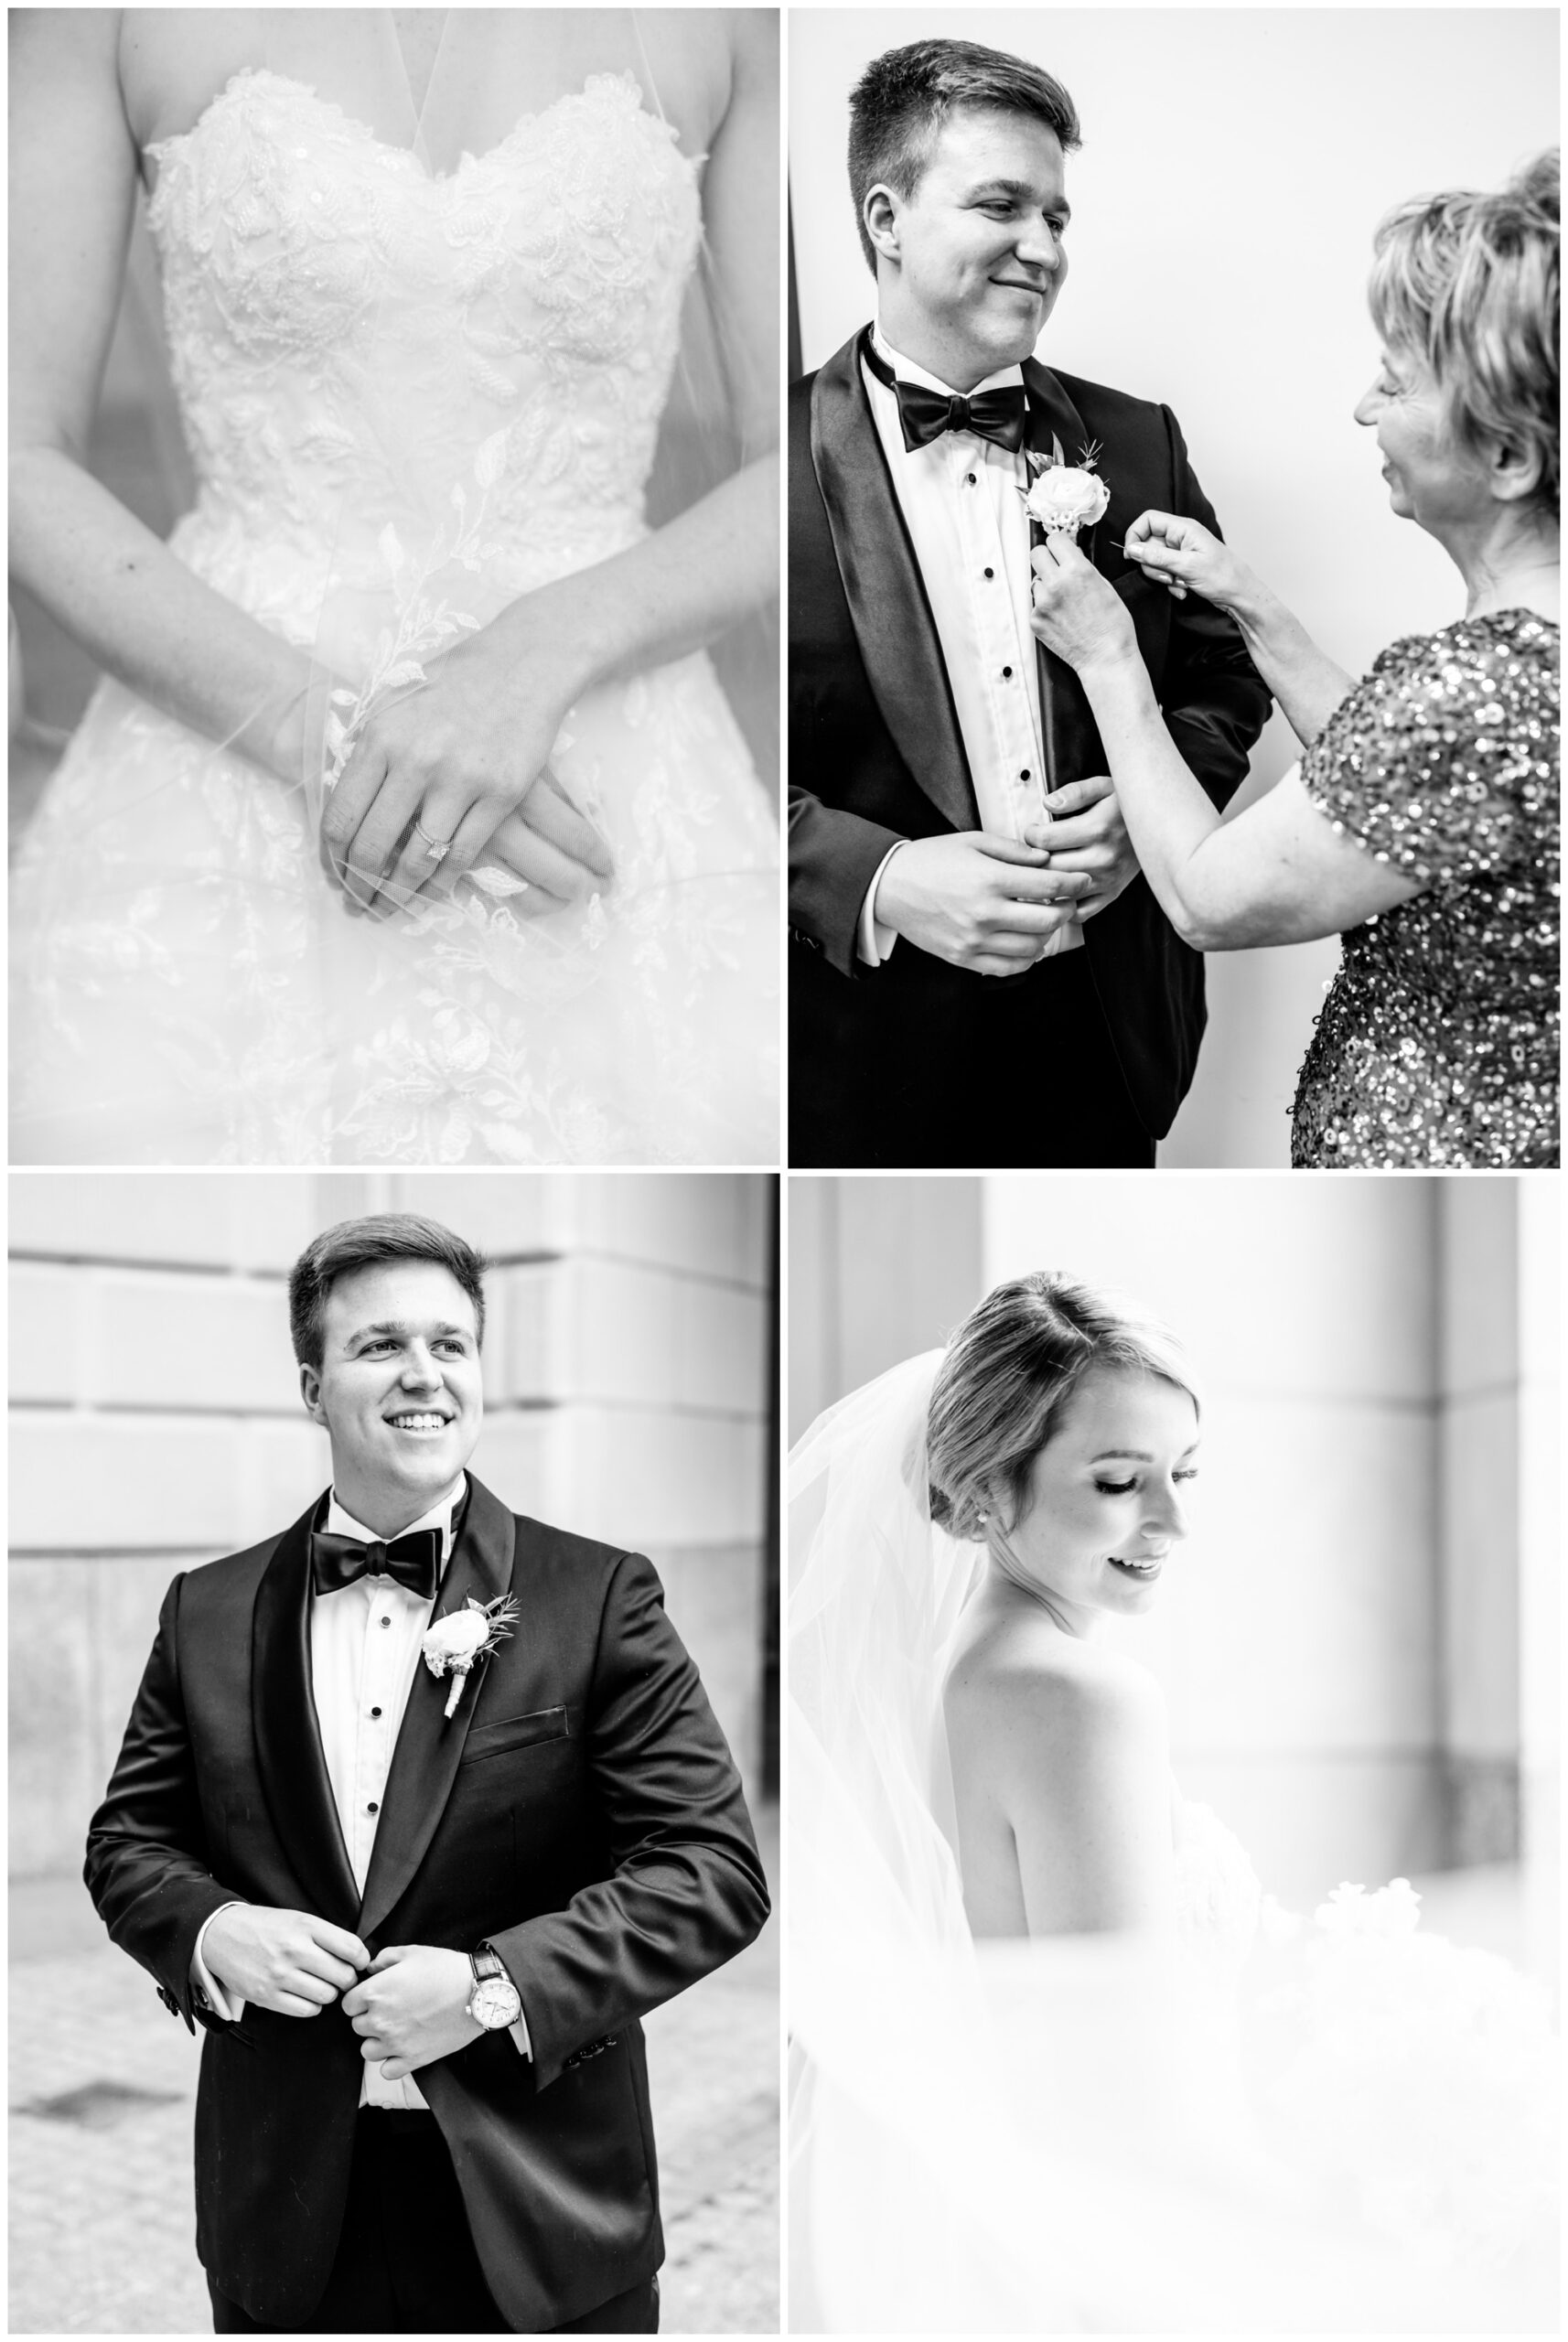 Ronald Reagan Building D.C. wedding, RR Building International Trade Center, classic D.C. wedding, classic wedding, black and white wedding, white aesthetic, spring wedding, spring wedding aesthetic, Rachel E.H. Photography, D.C. wedding photography, D.C. wedding photographer, Estee Couture wedding dress, cathedral length embroidered veil, JSL Visions, Indochino tuxedo